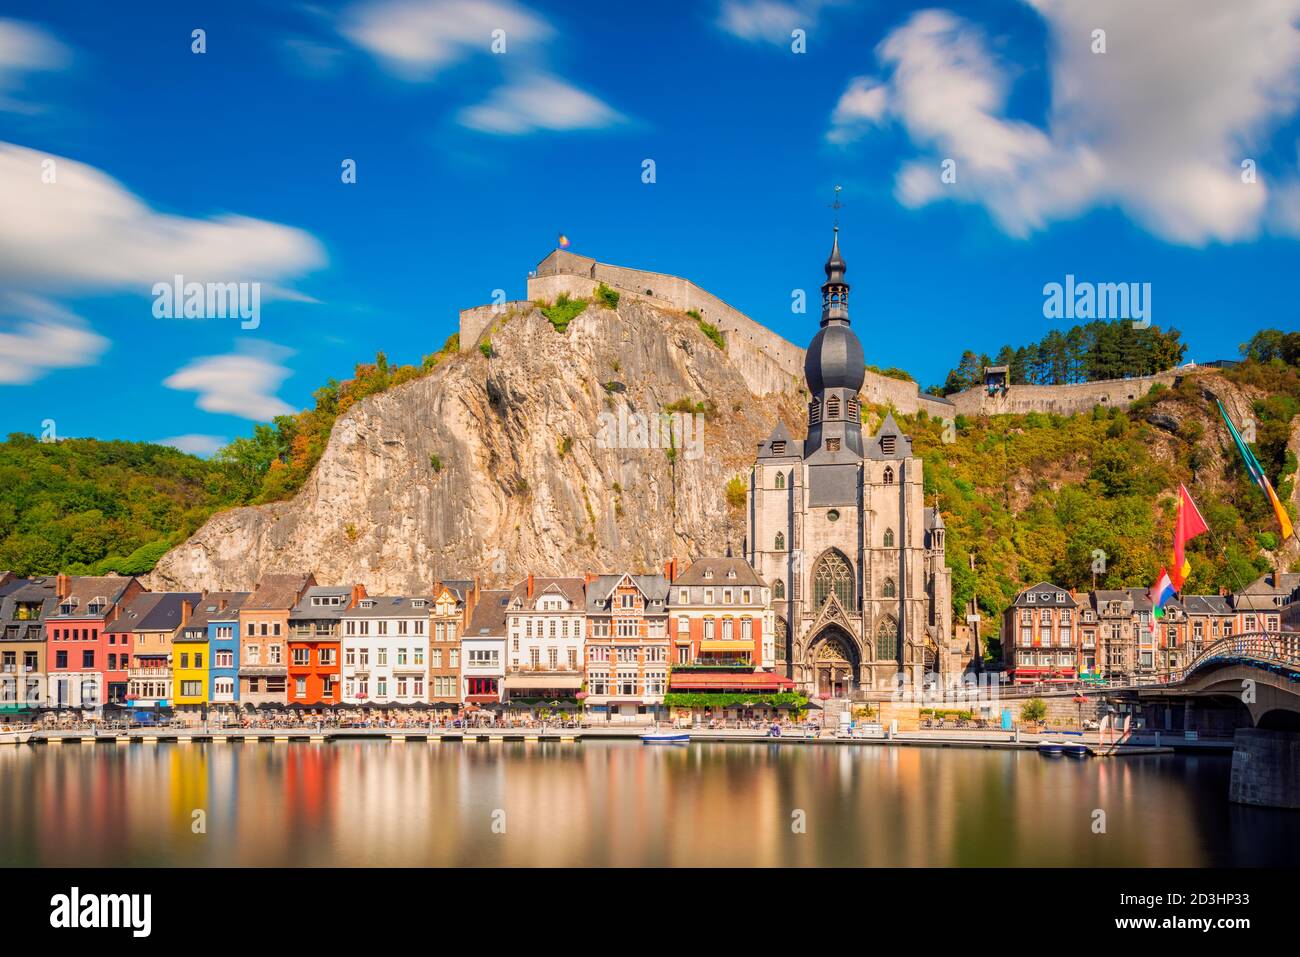 Long exposure of the Village of Dinant in the Namur Province and Ardennes Region of Wallonia, Belgium. The Meuse river flows through Dinant. Stock Photo